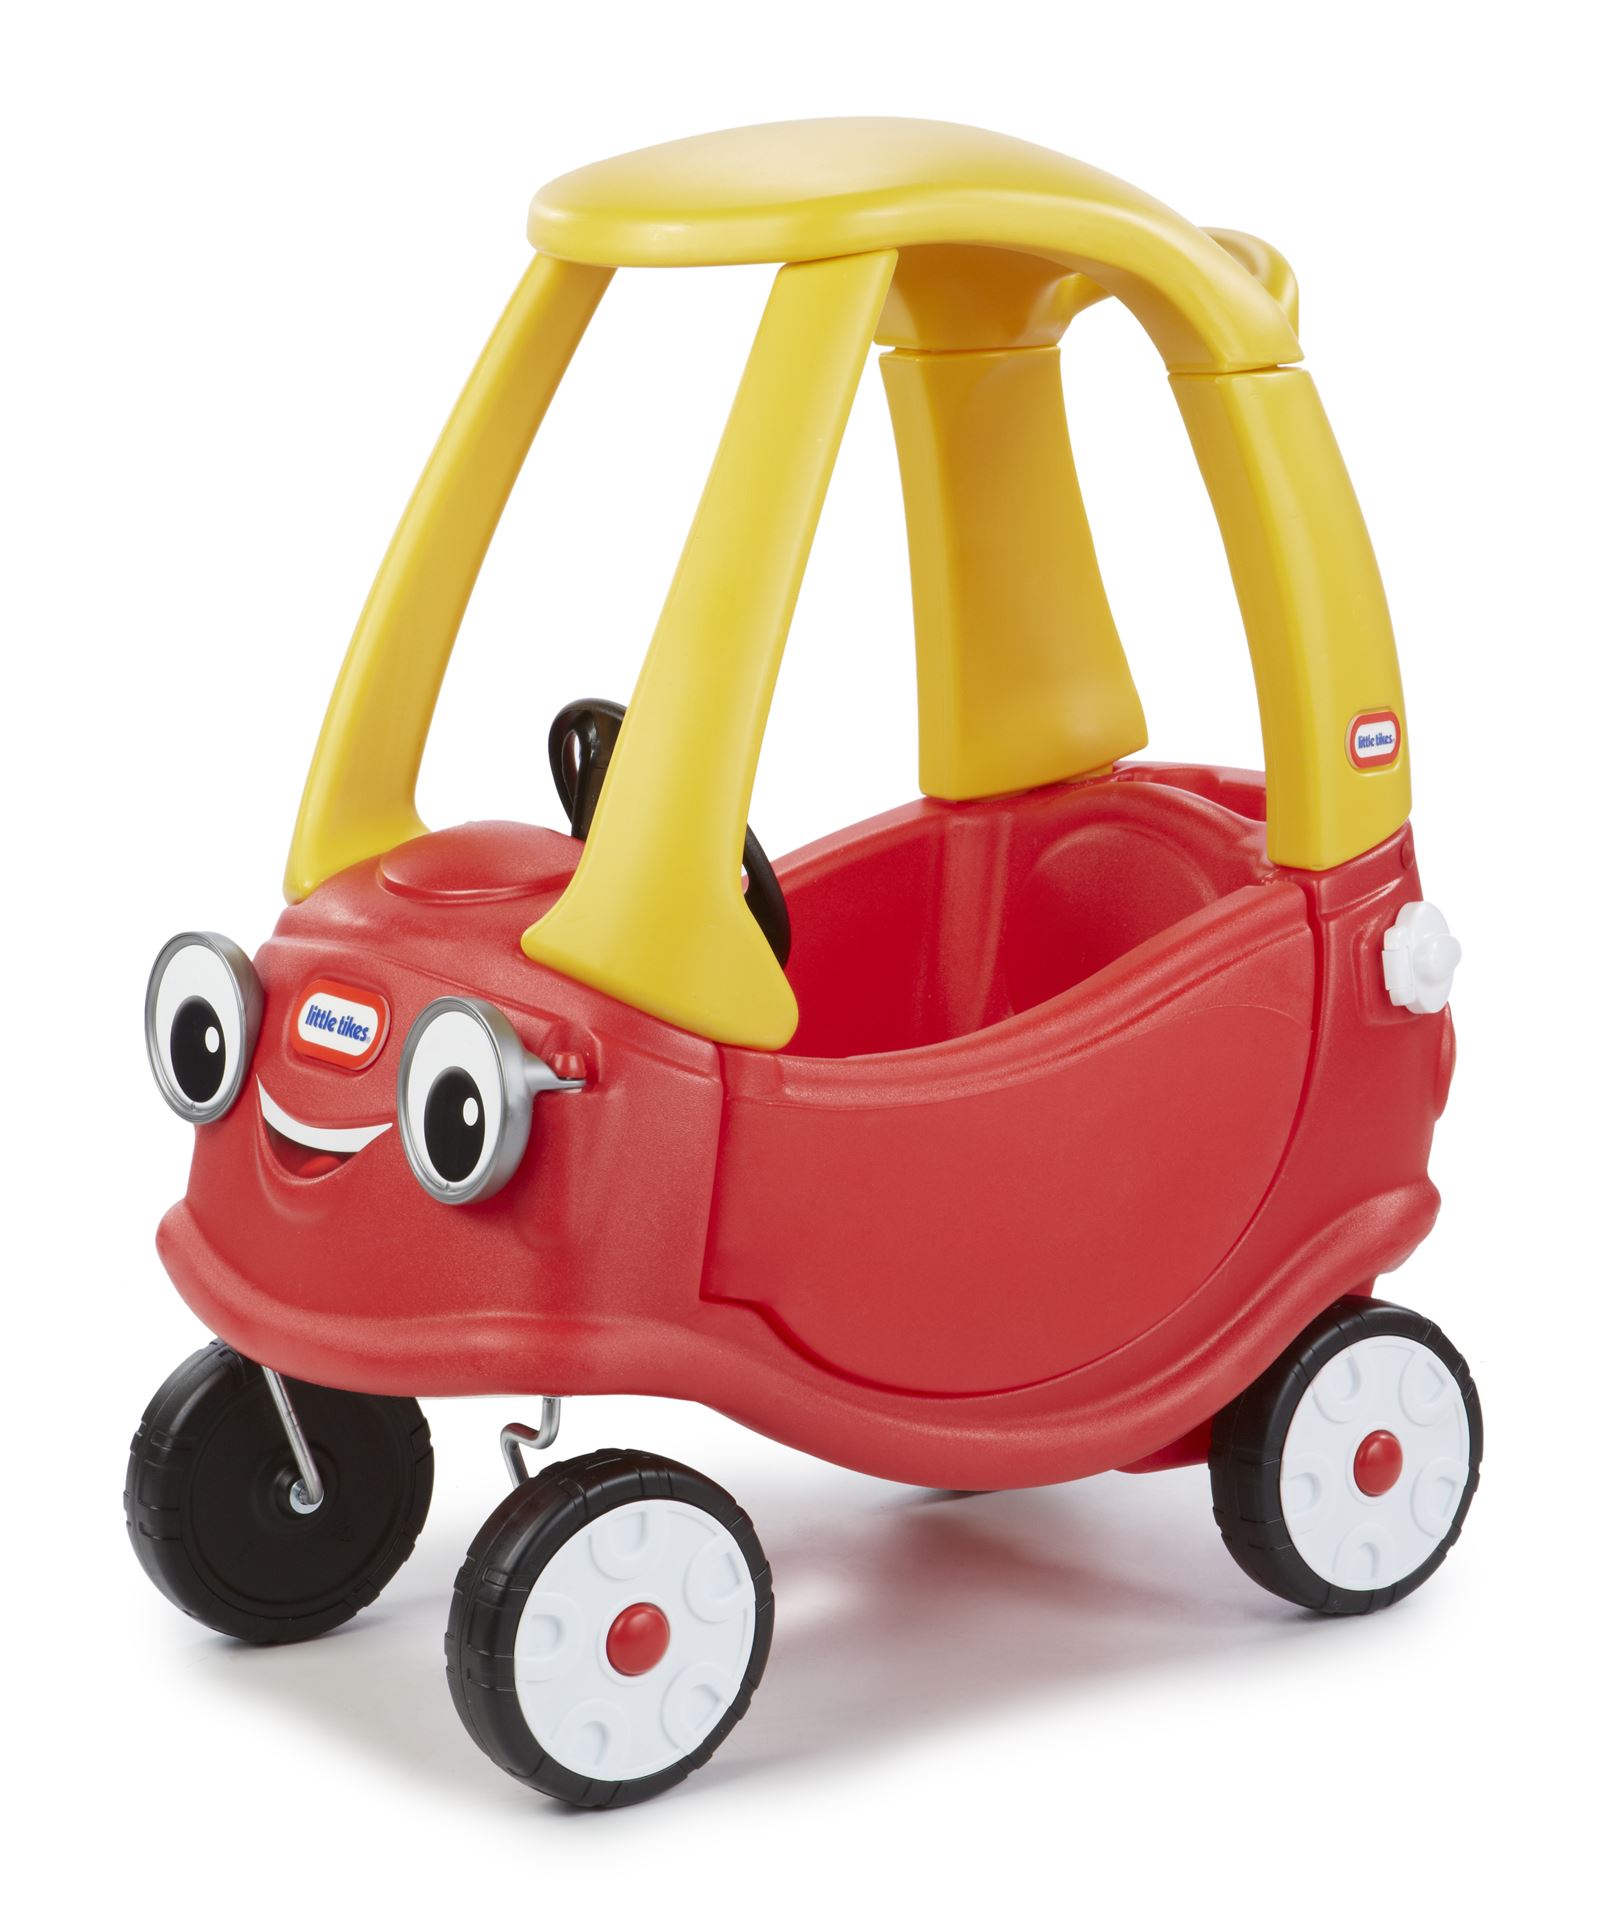 Little-Tikes-loopauto-Cozy-Coupe-rood-geel